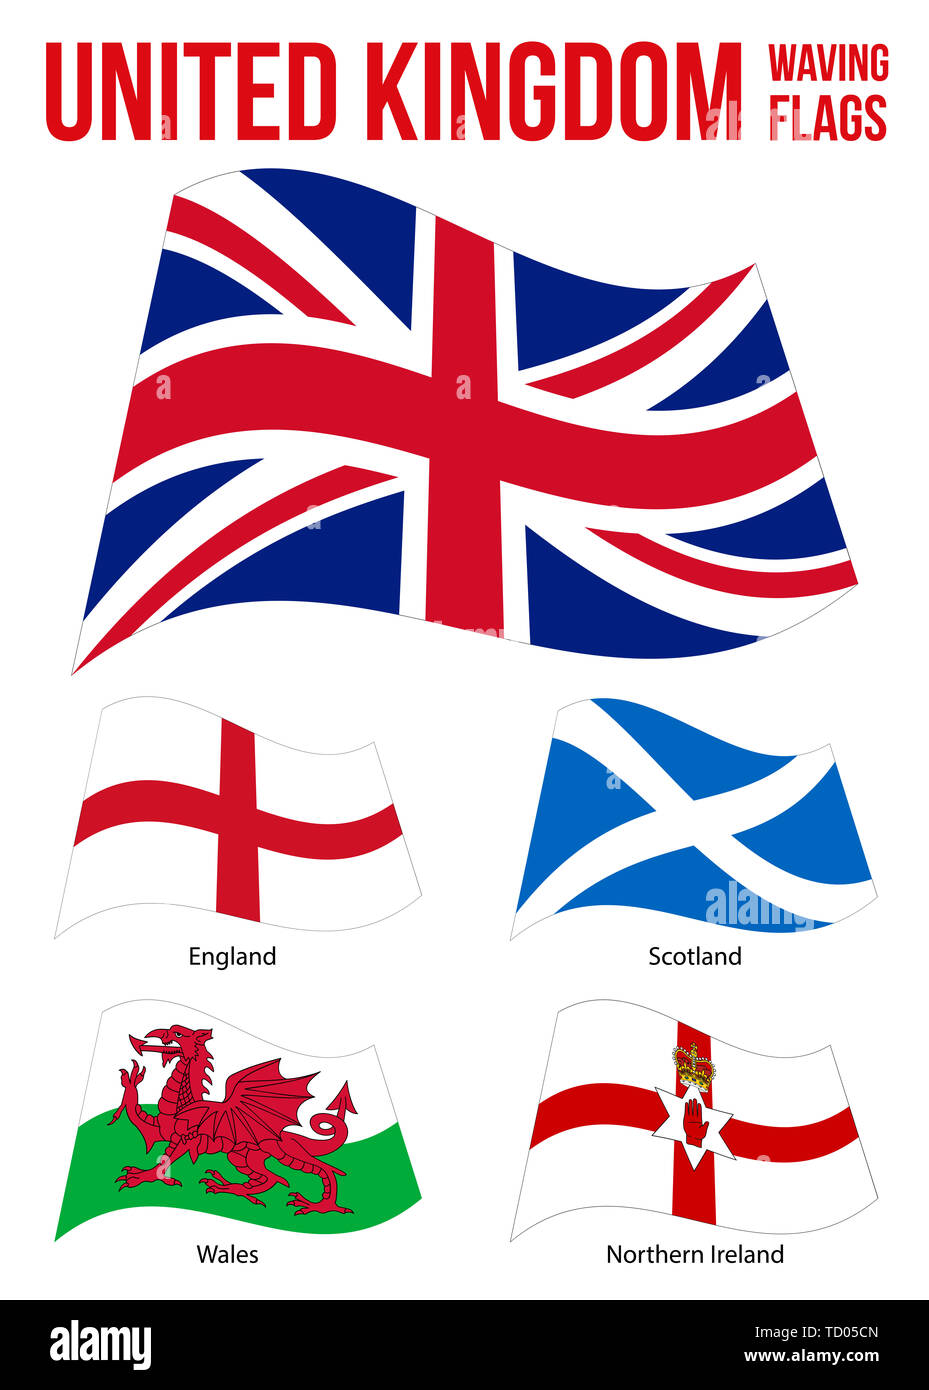 United Kingdom Waving Flags Collection Vector Illustration on White Background. Countries of the United Kingdom. Flag of England, Northern Ireland, Wa Stock Photo